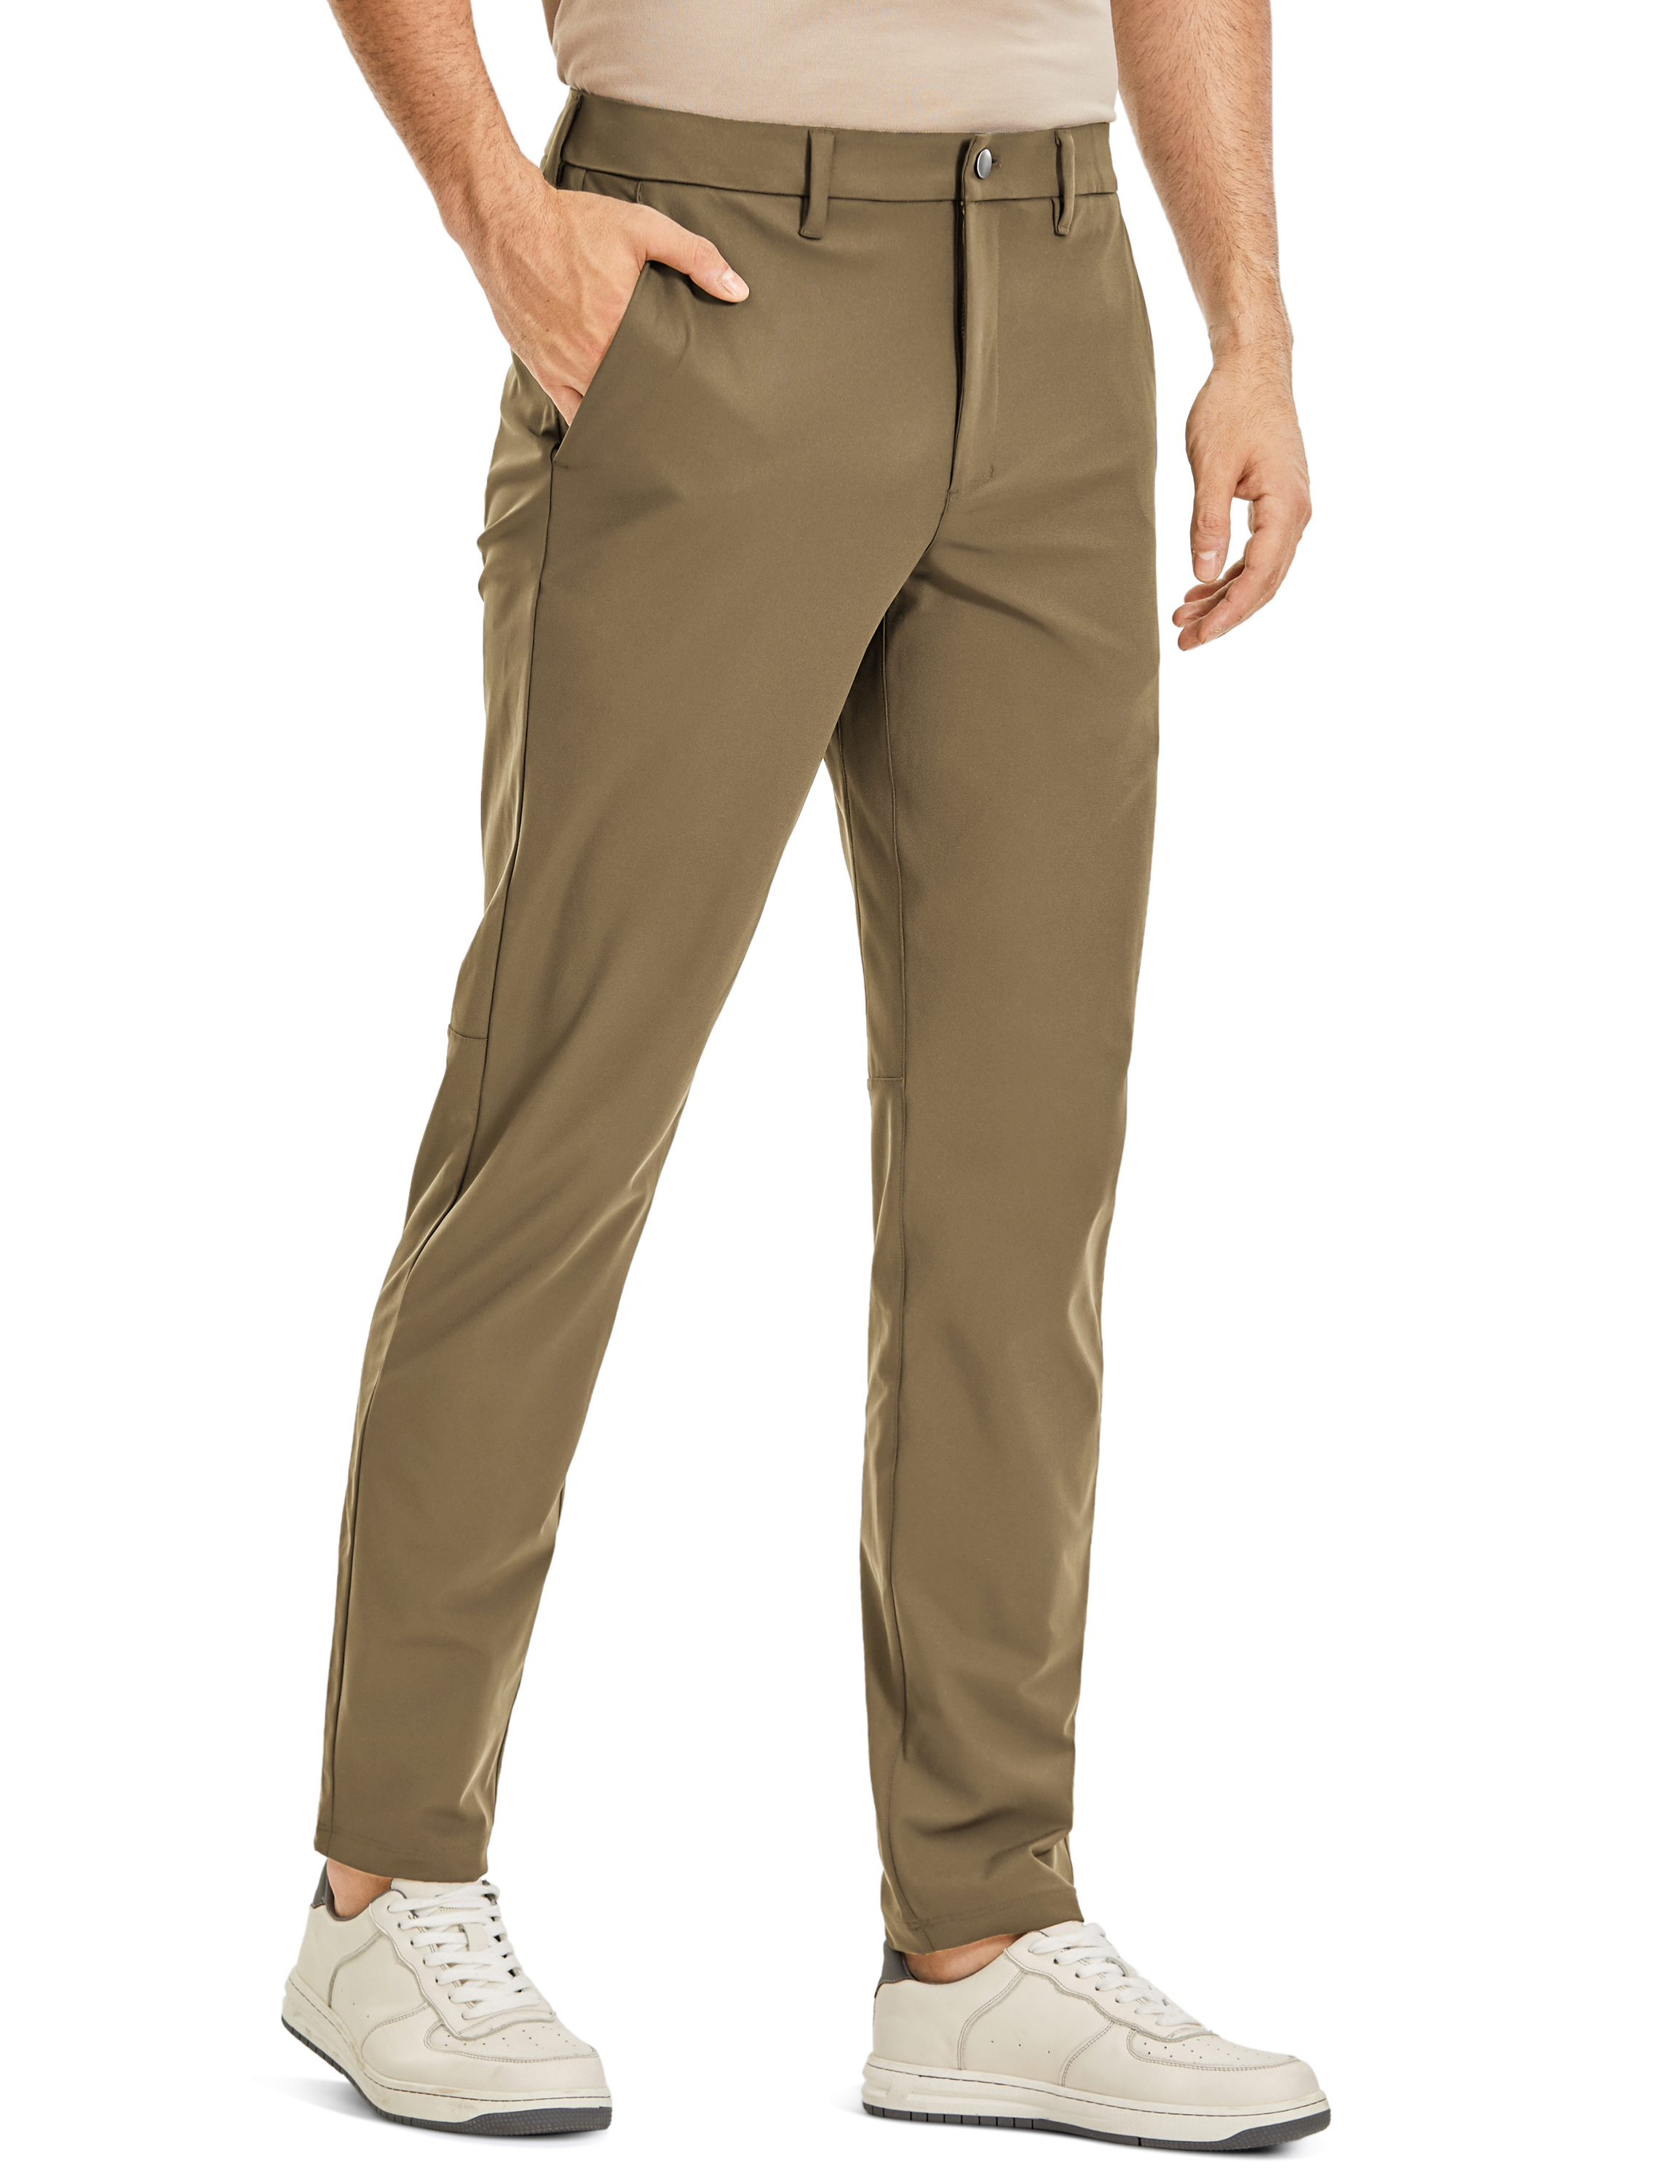 CRZ YOGA All-Day Comfy Classic-Fit Men's 34 Inches Golf Pants with